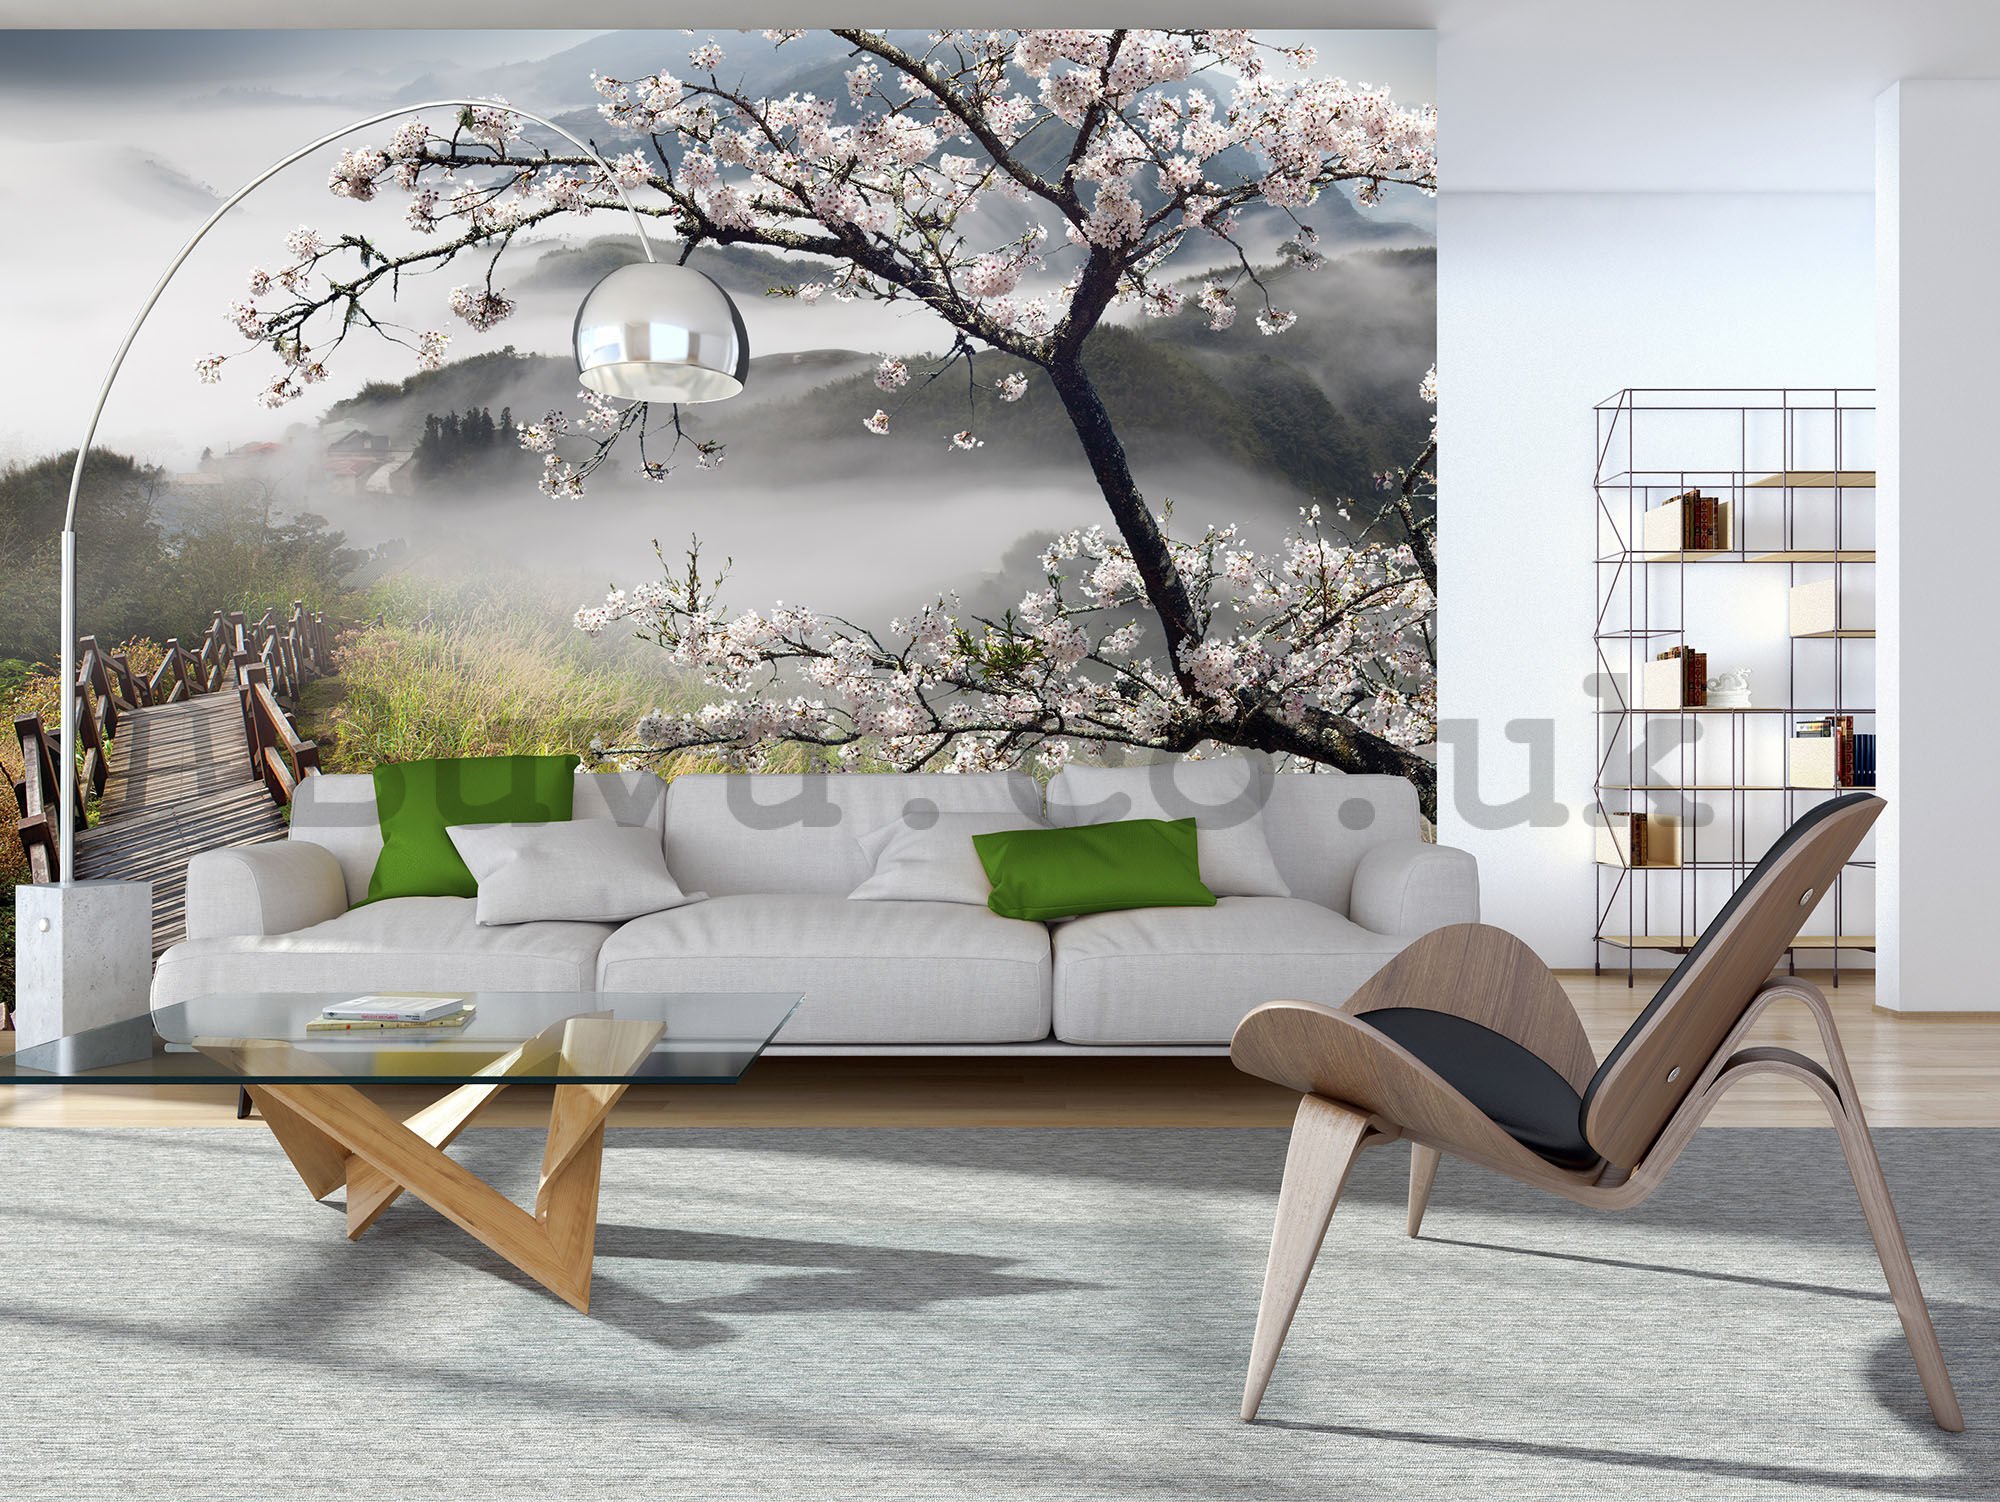 Wall mural vlies: Cherry tree above the stairs - 254x368 cm